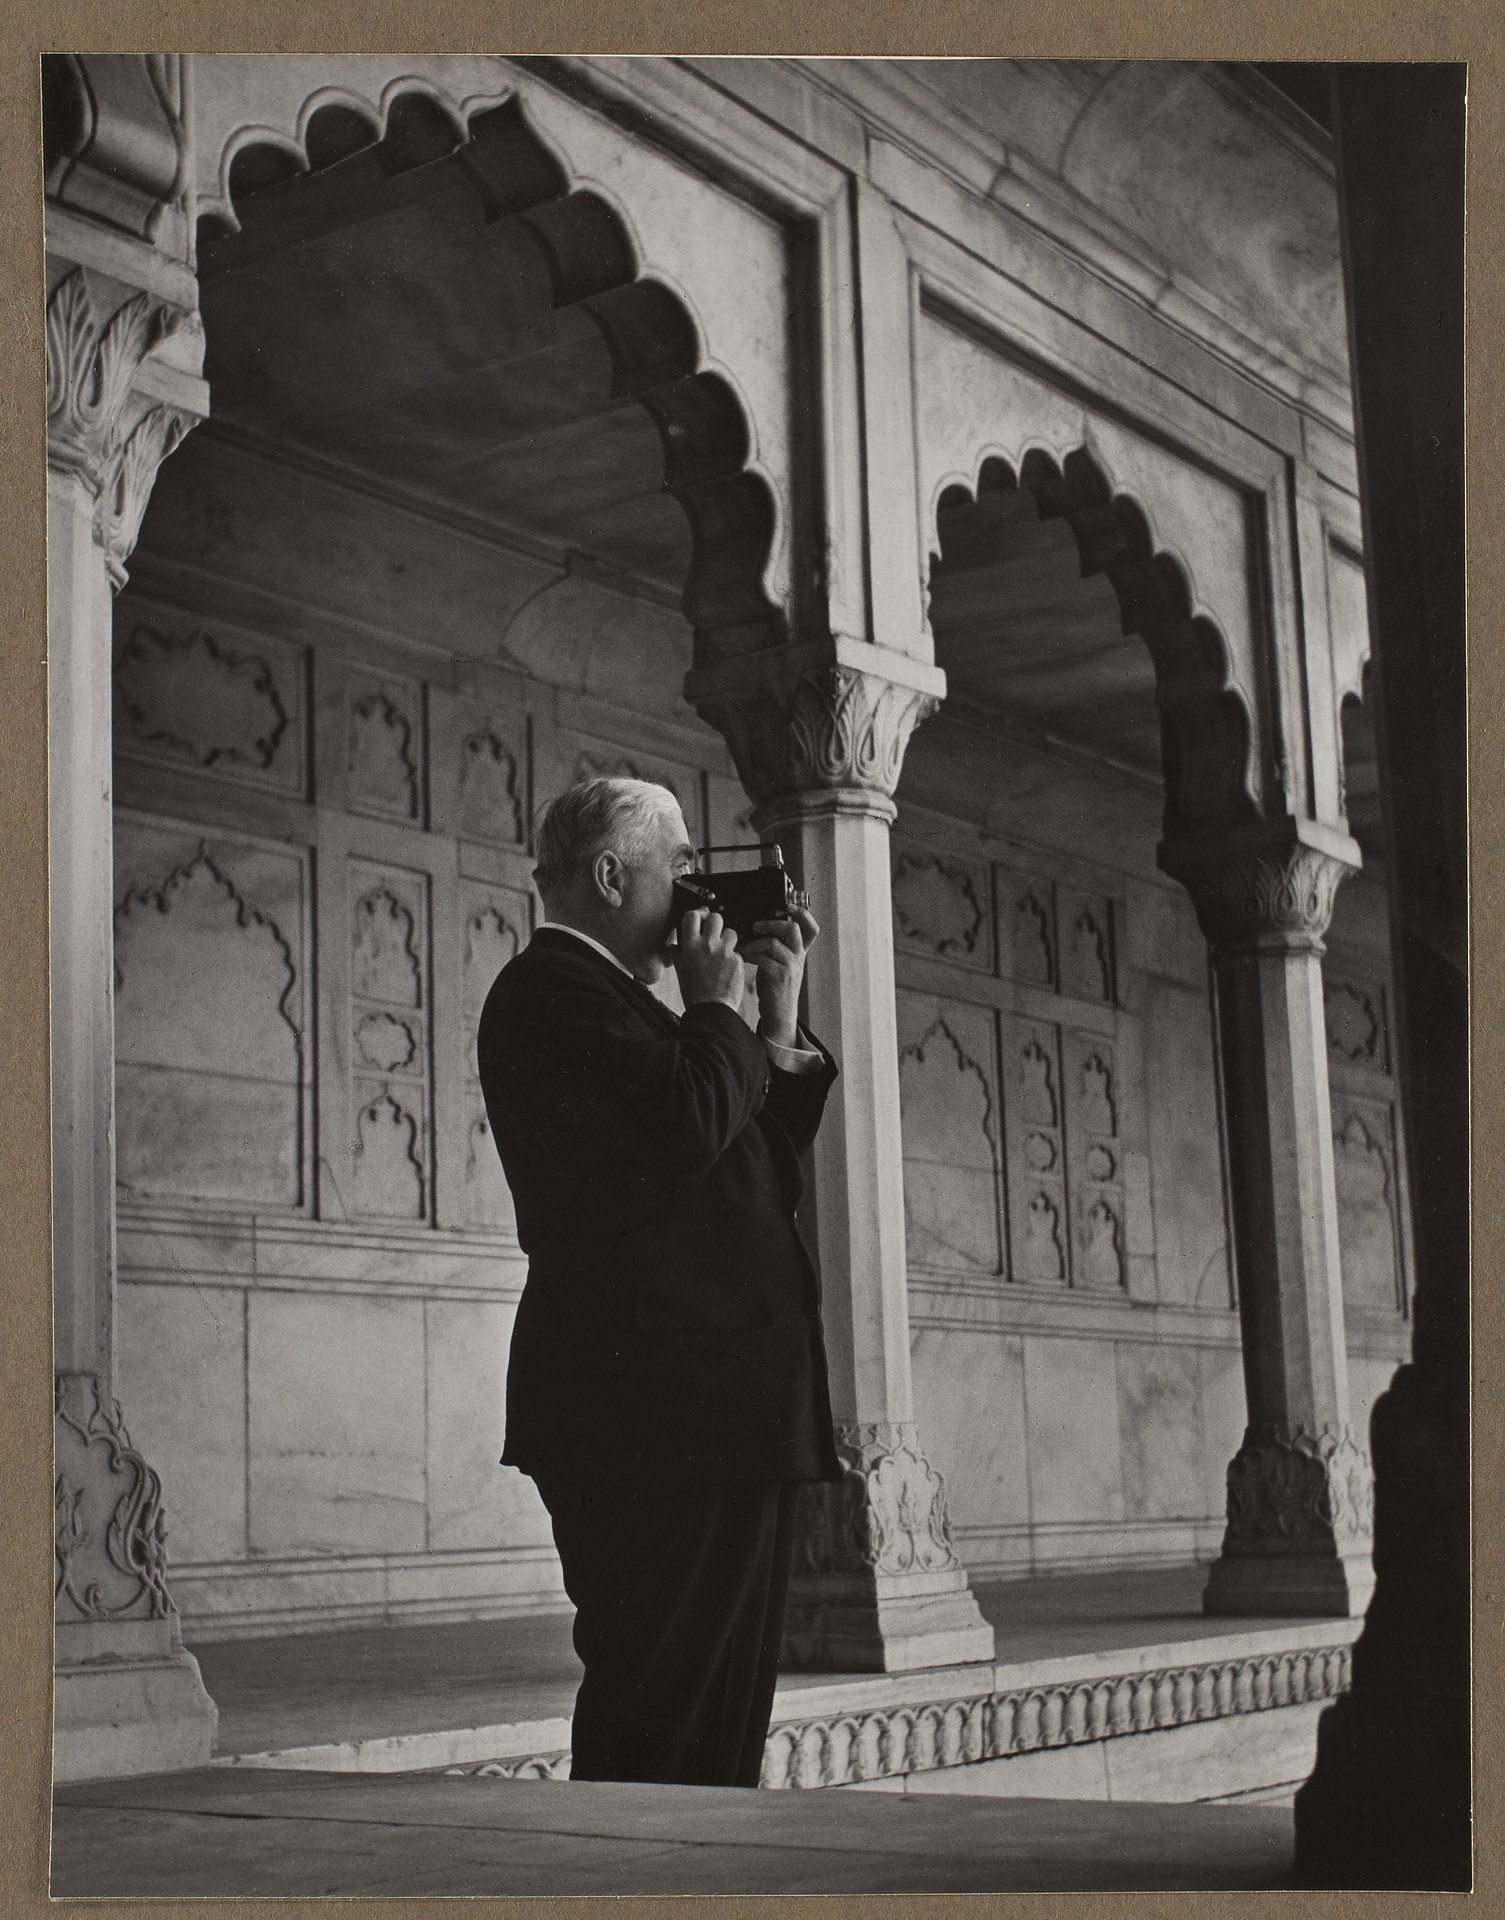 Robert Menzies filming at the Agra Fort during a visit to India in 1950